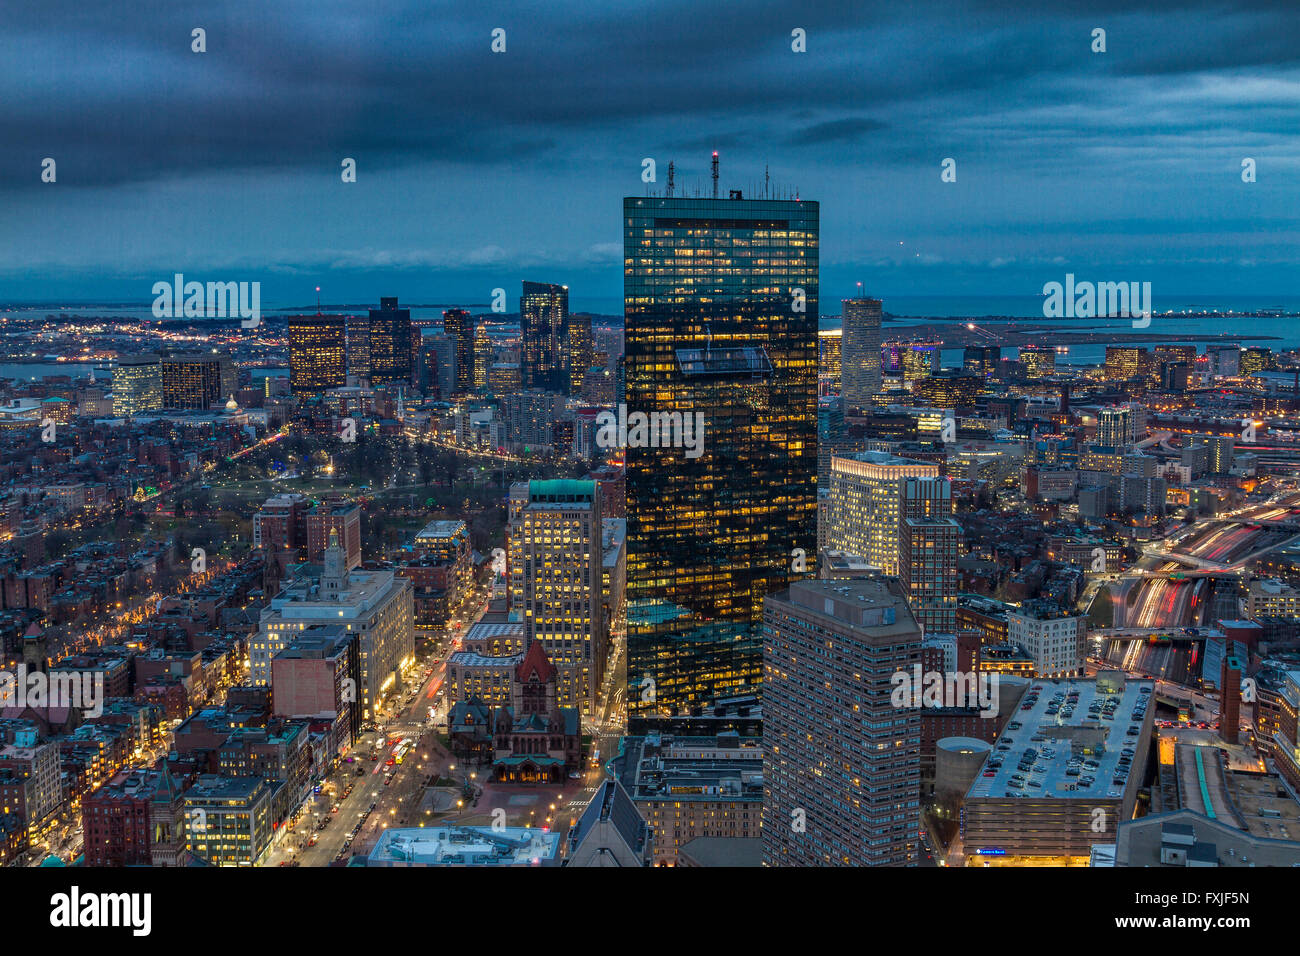 Aerial view of The City of Boston at night seen from The Prudential Tower, Boston, Massachusetts  USA Stock Photo